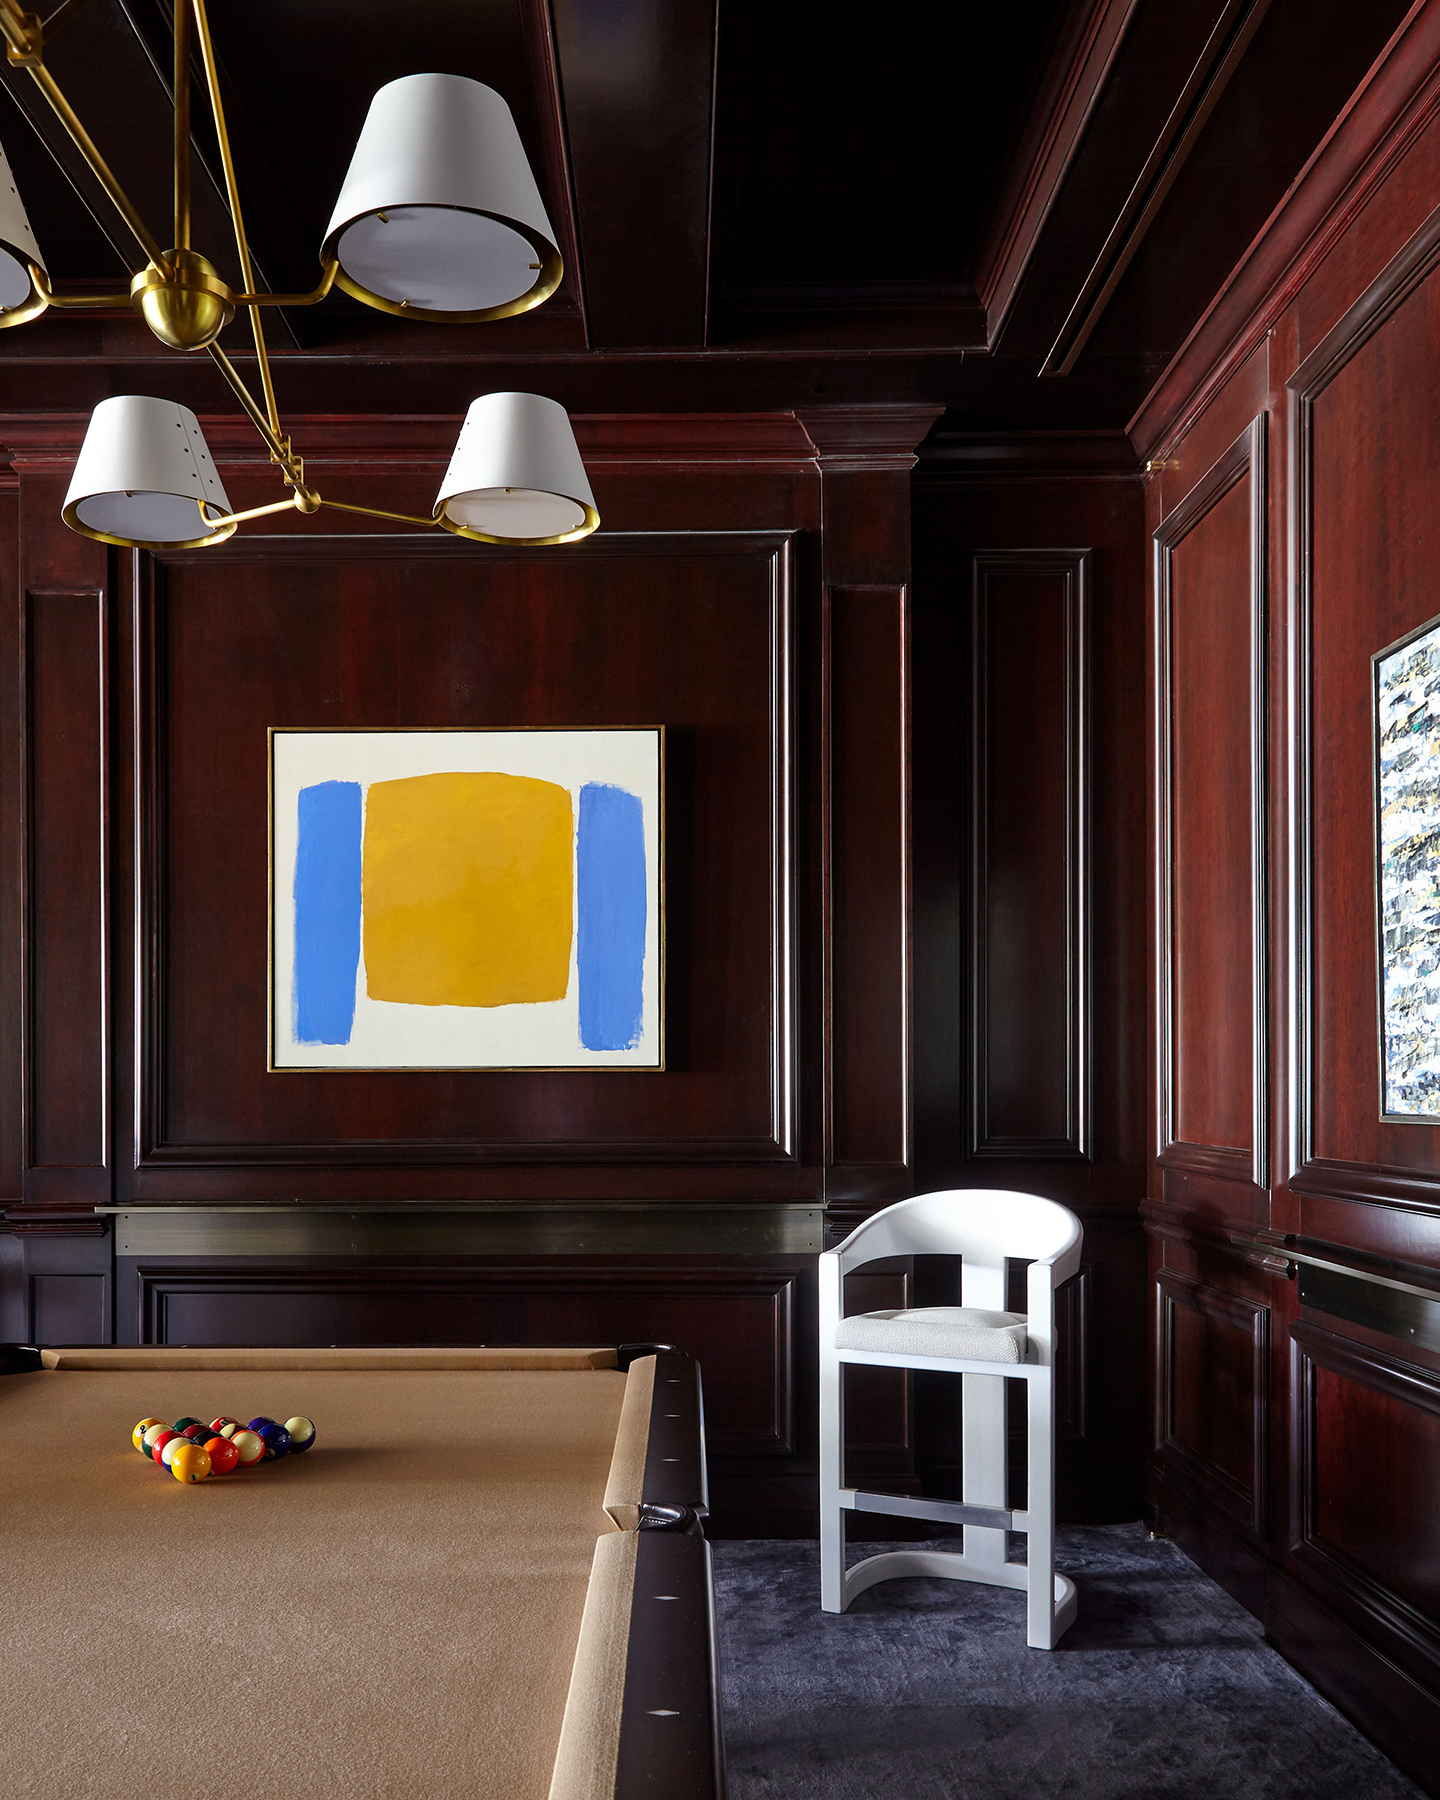 A Dark Billard Room With Wooden Walls, Billard Table, White Chair, and Tricolored Painting.